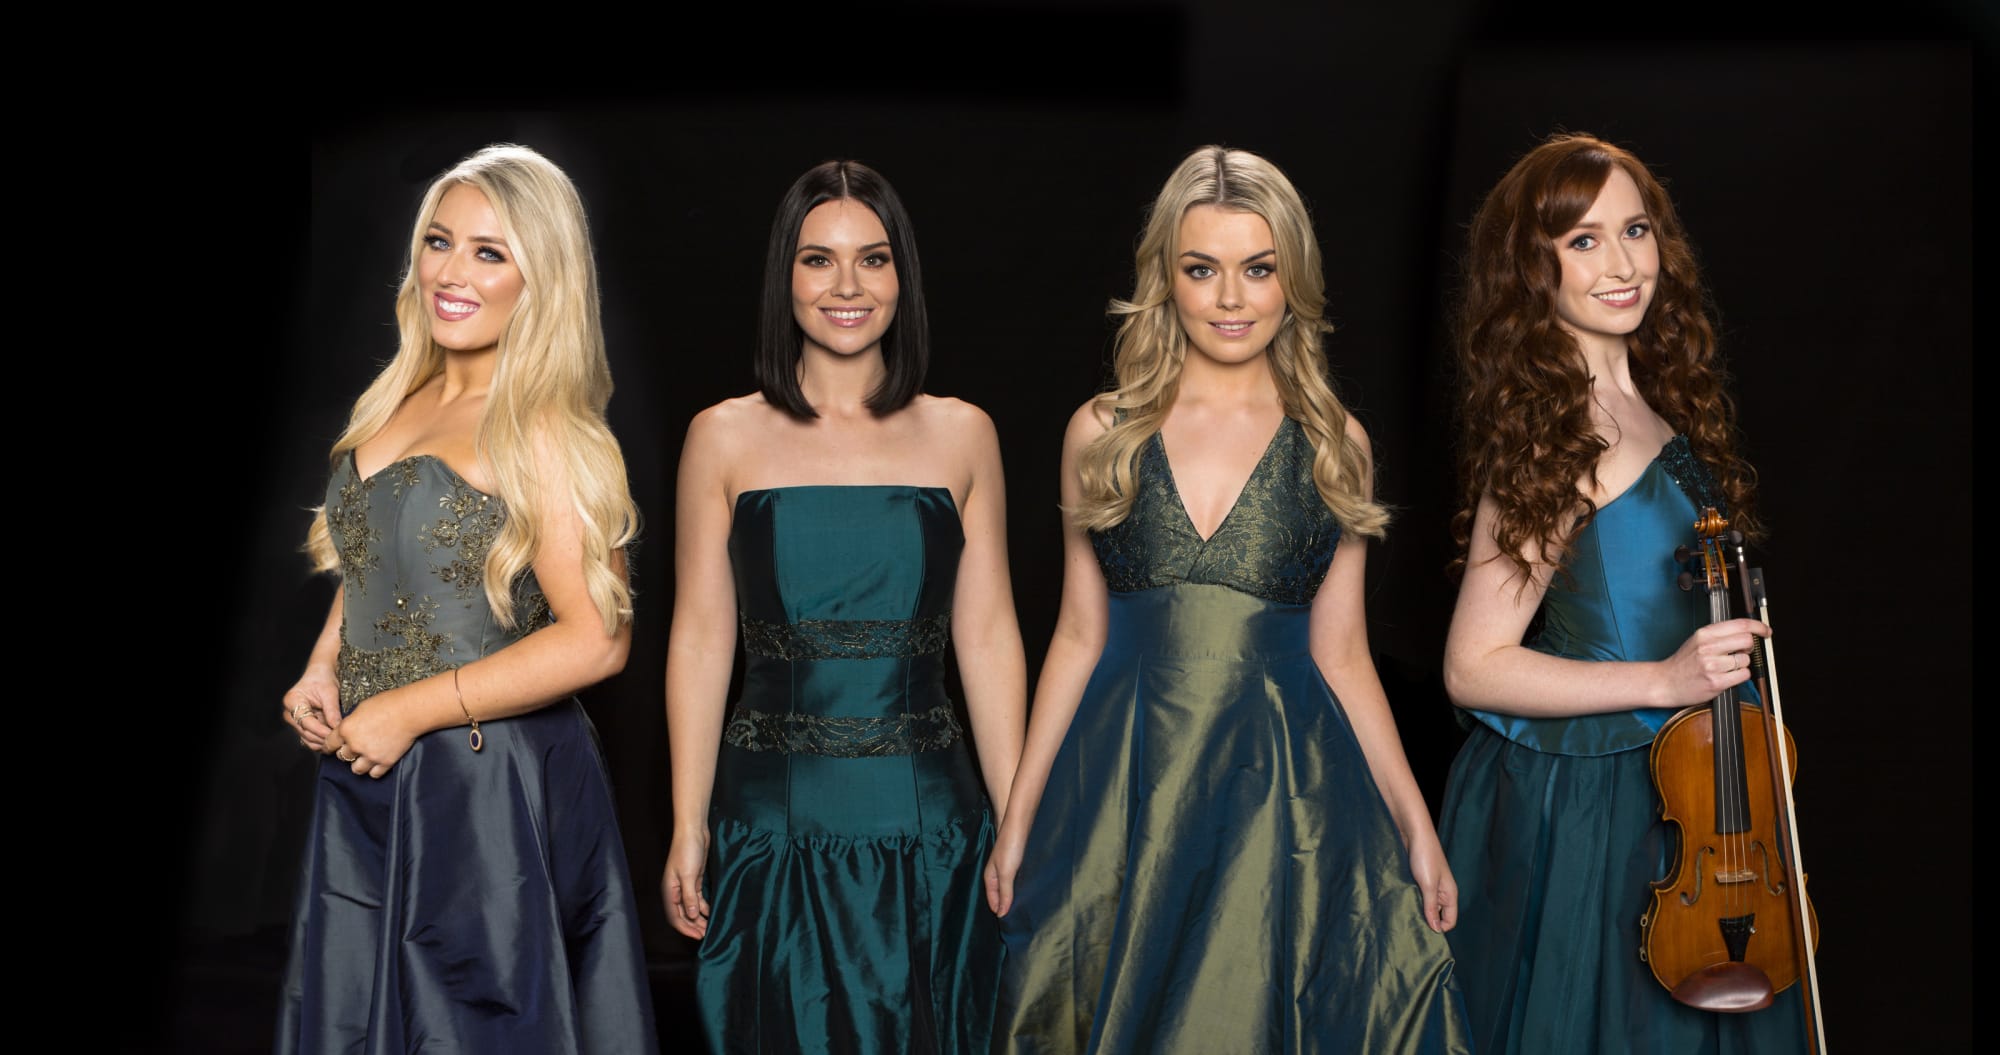 Celtic Woman's 15th Anniversary Celebration Tour is rich in Irish heritage